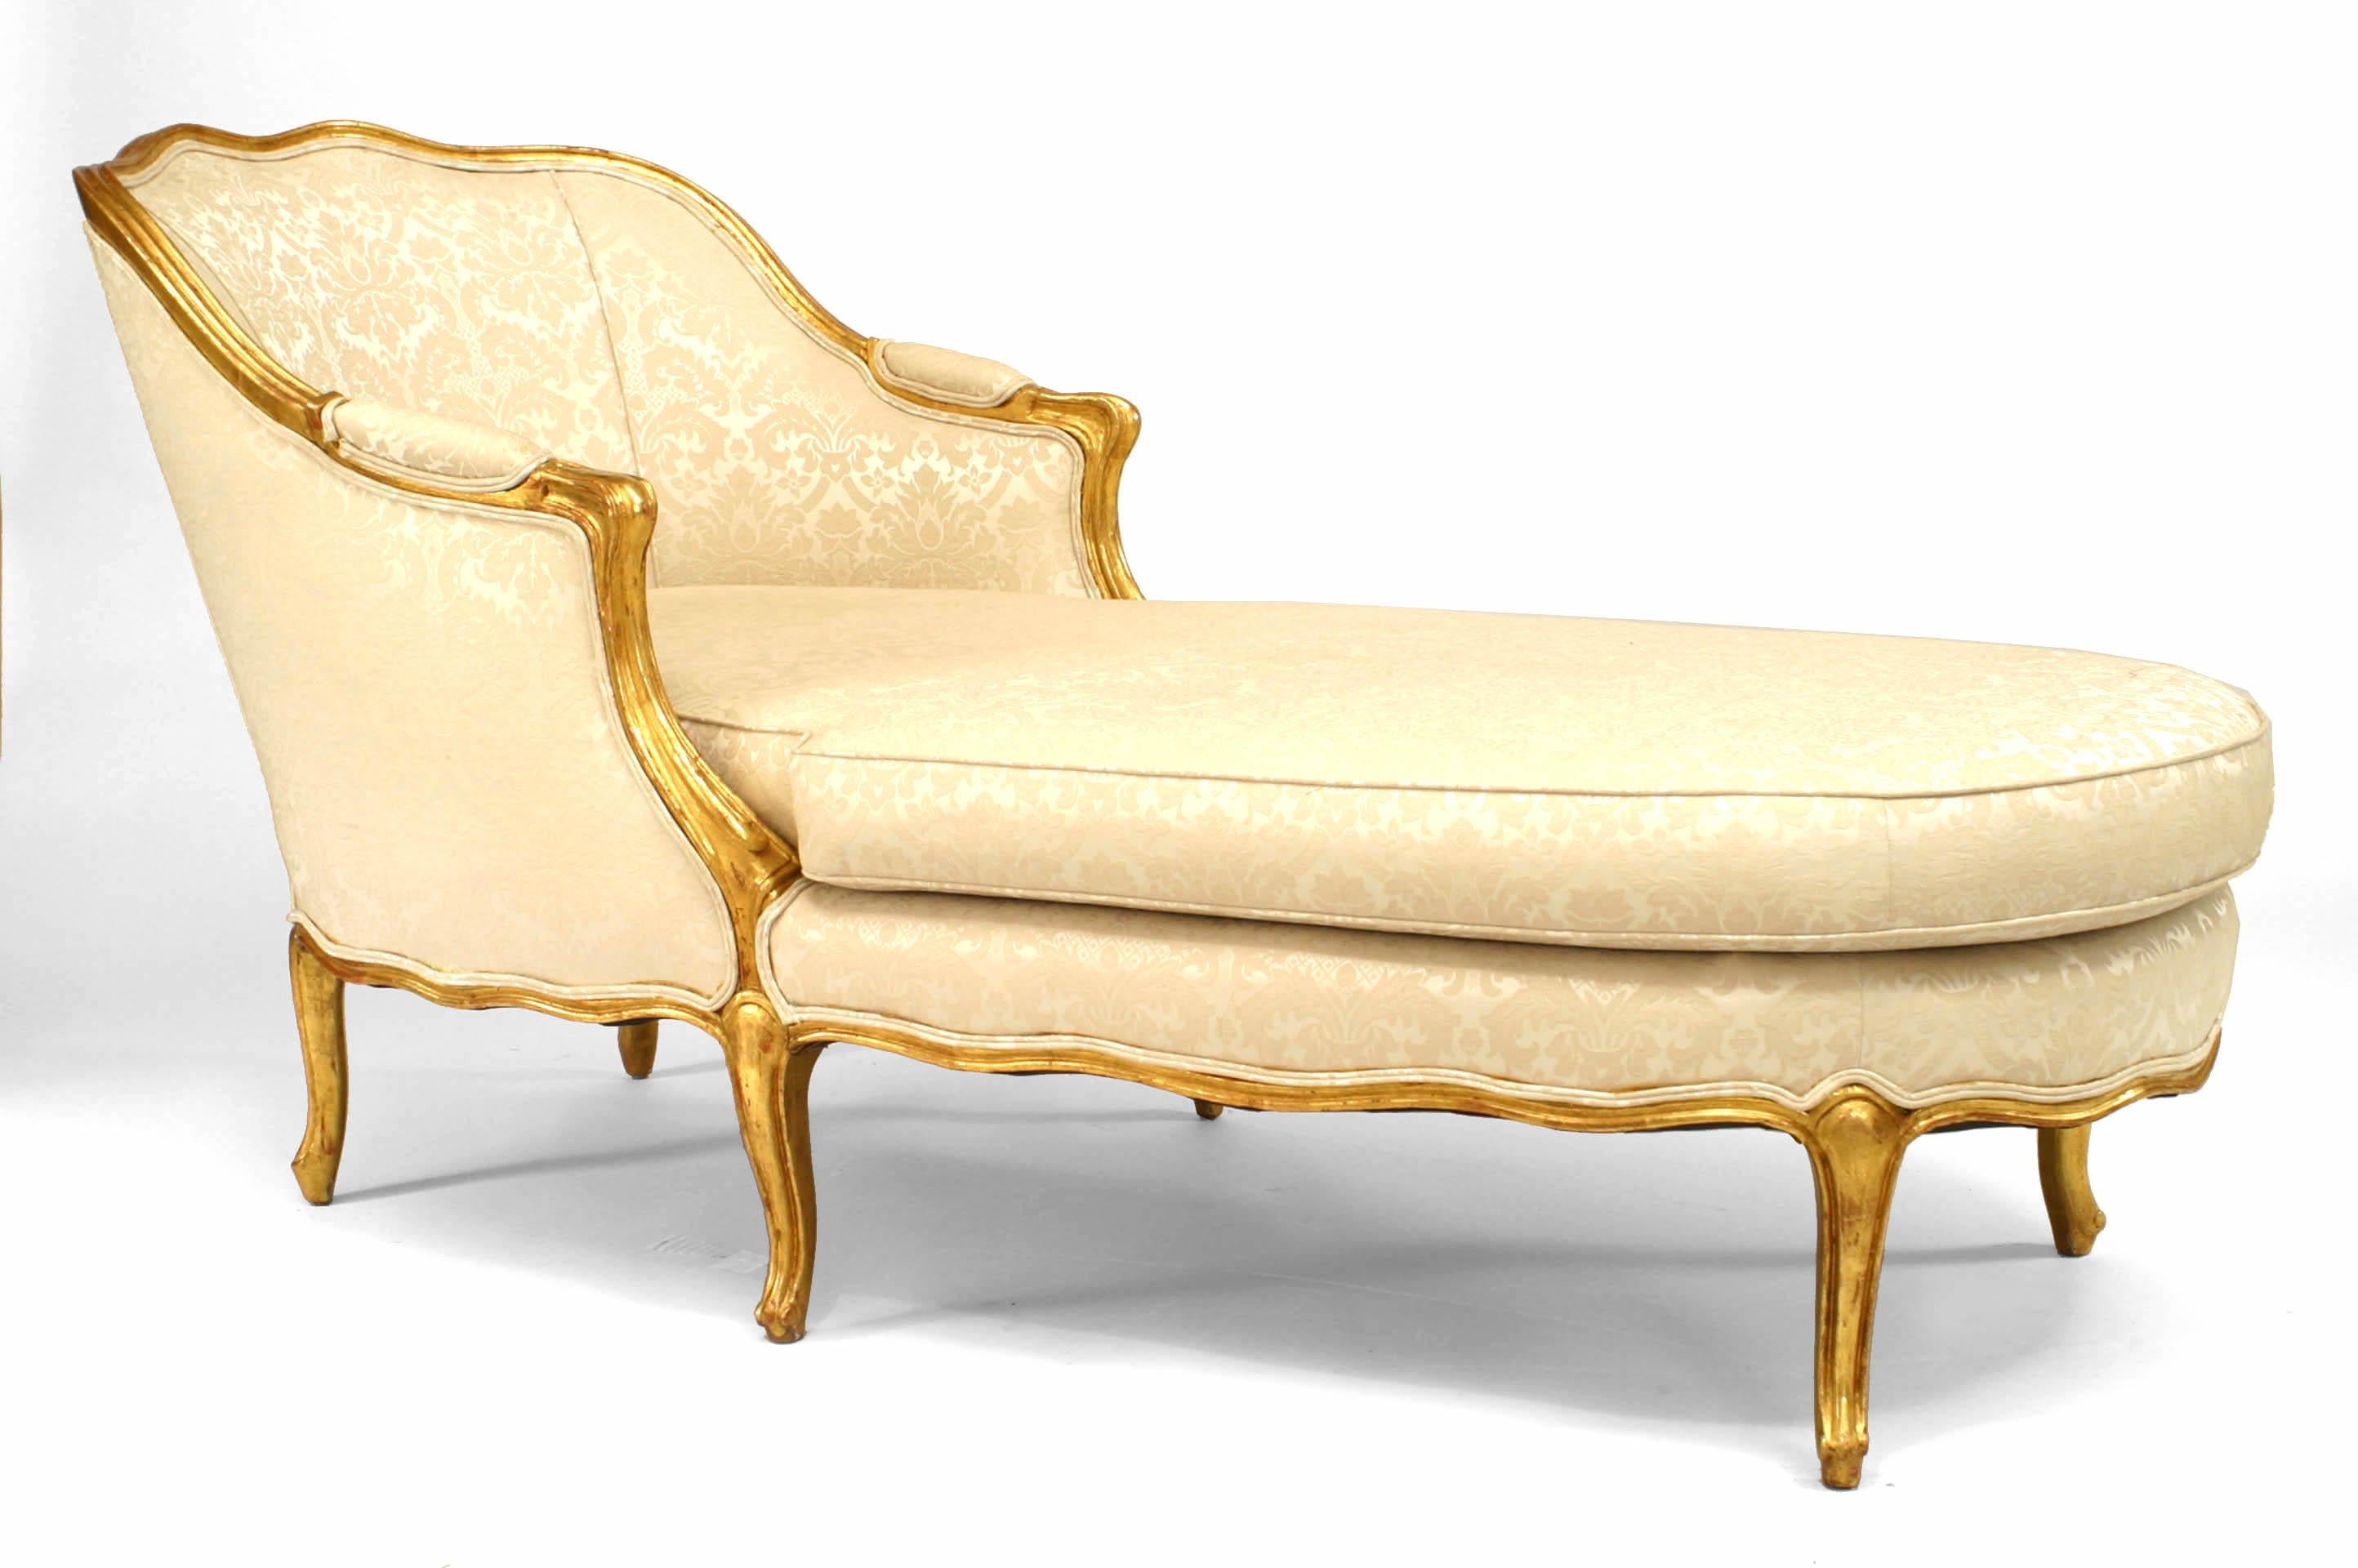 French Louis XV style '19th-20th Century' gilt chaise longue with white damask upholstery and cushion.